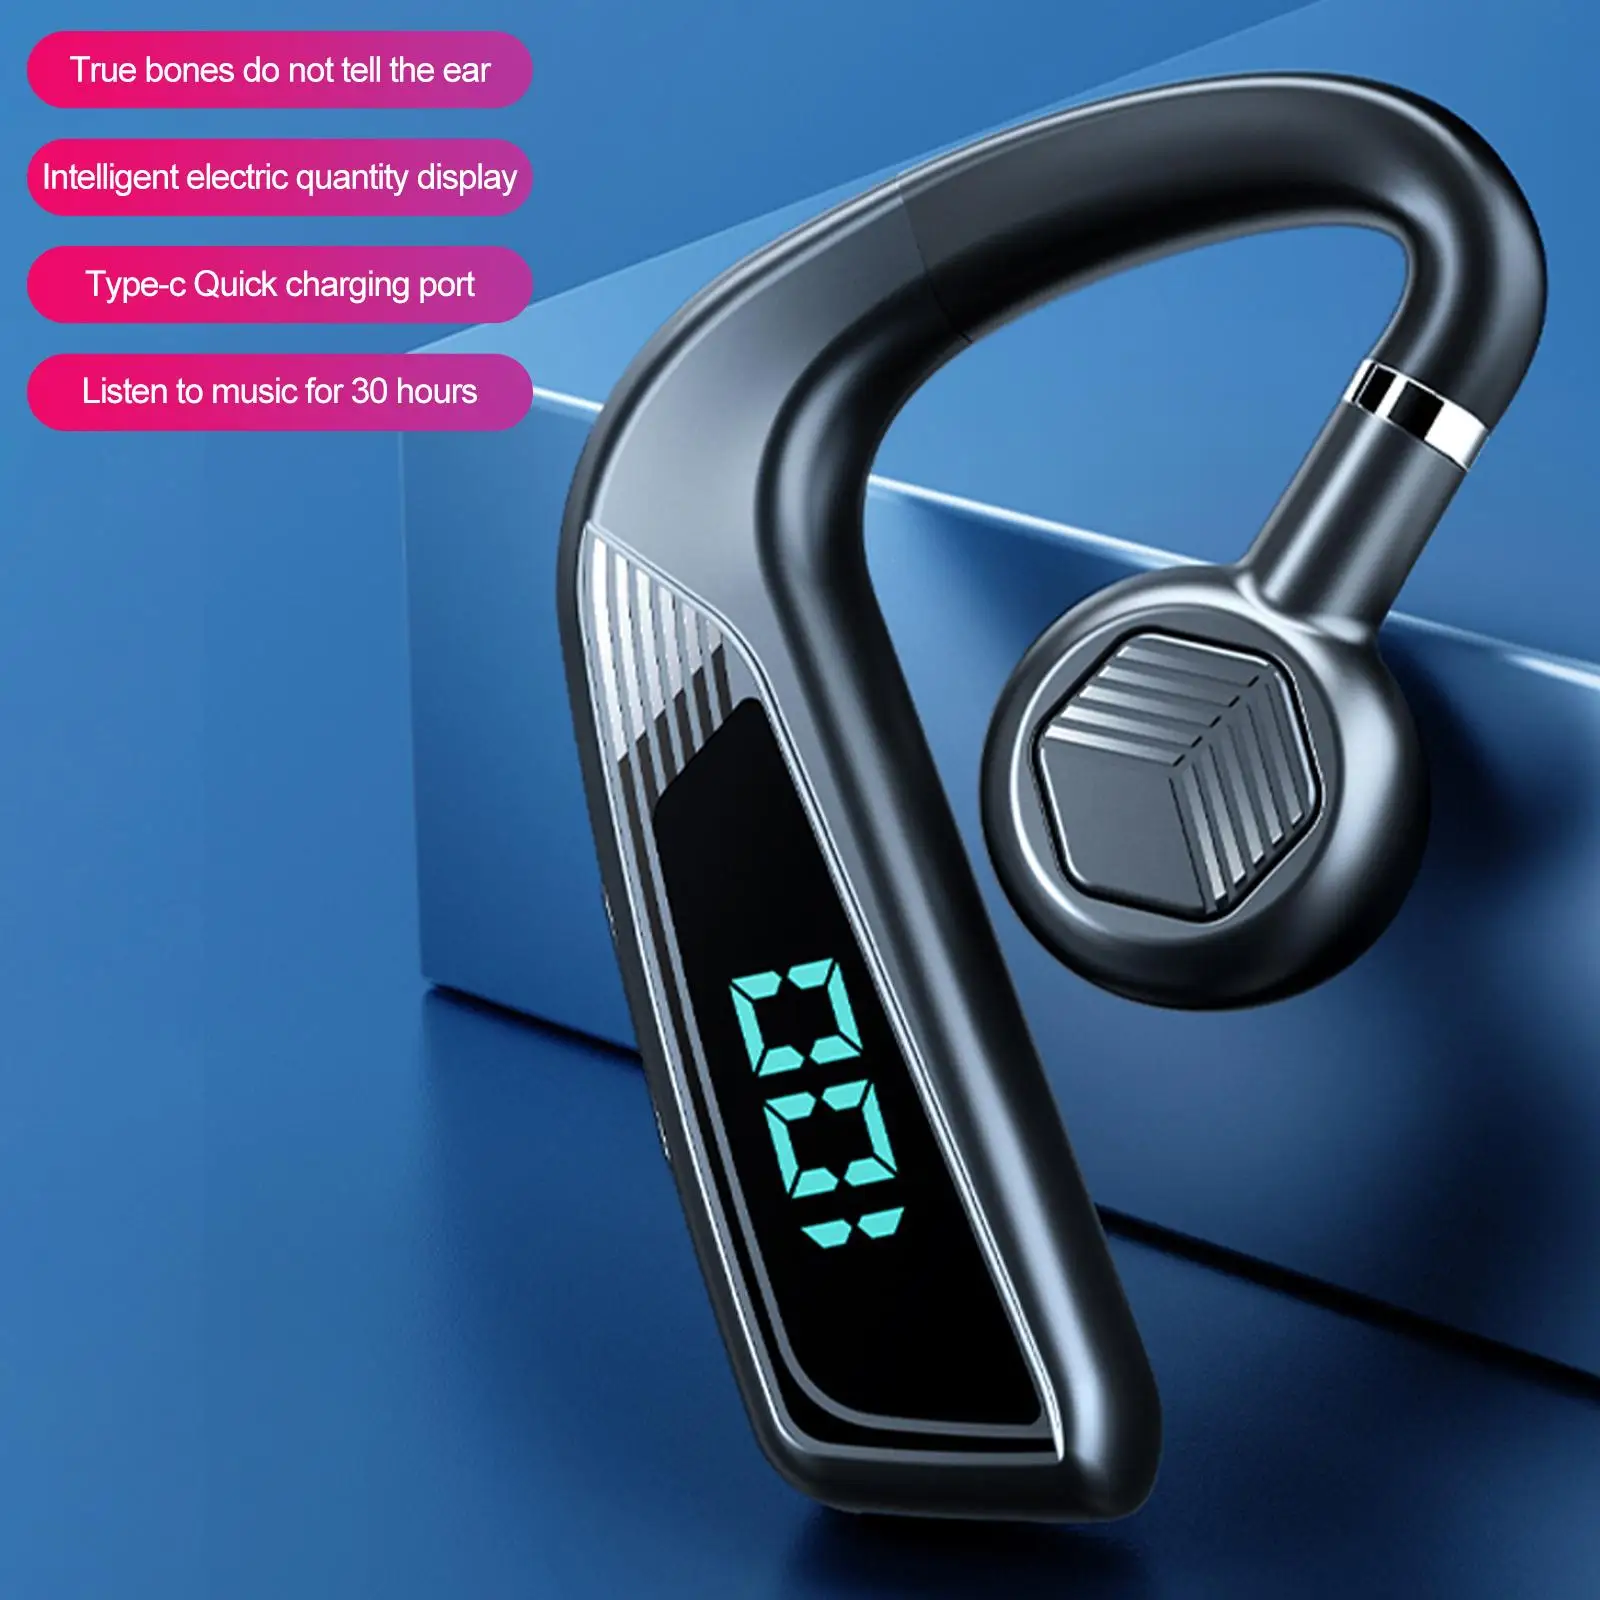 Bluetooth 5.0 Bone Conduction Headphones Sweat Resistant IPX5 Waterproof 30 Hours Music Hands Free Earpiece for Hiking Driving